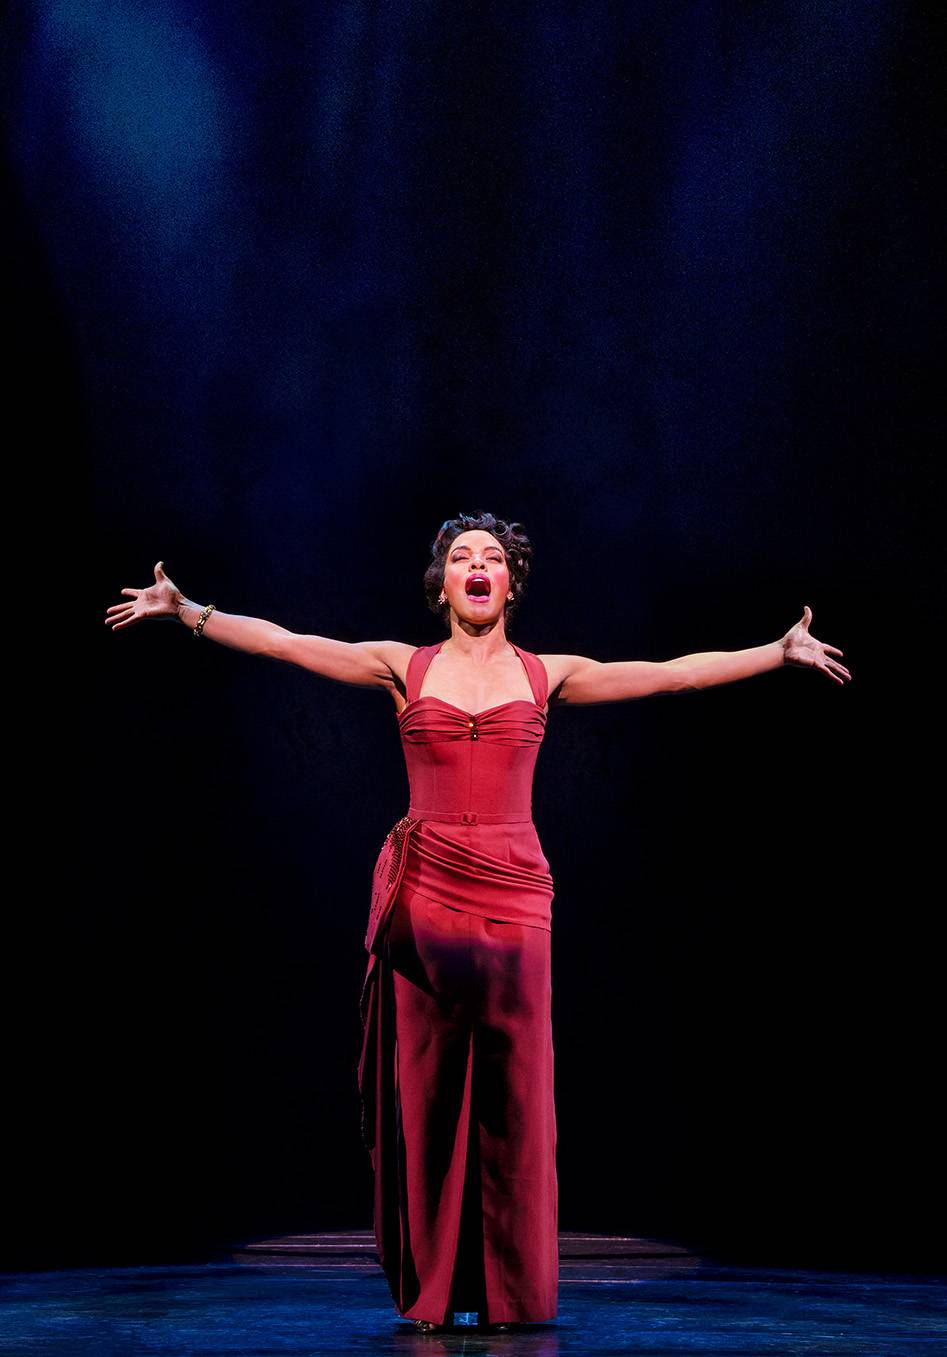 woman in red dress singing with her arms stretched out